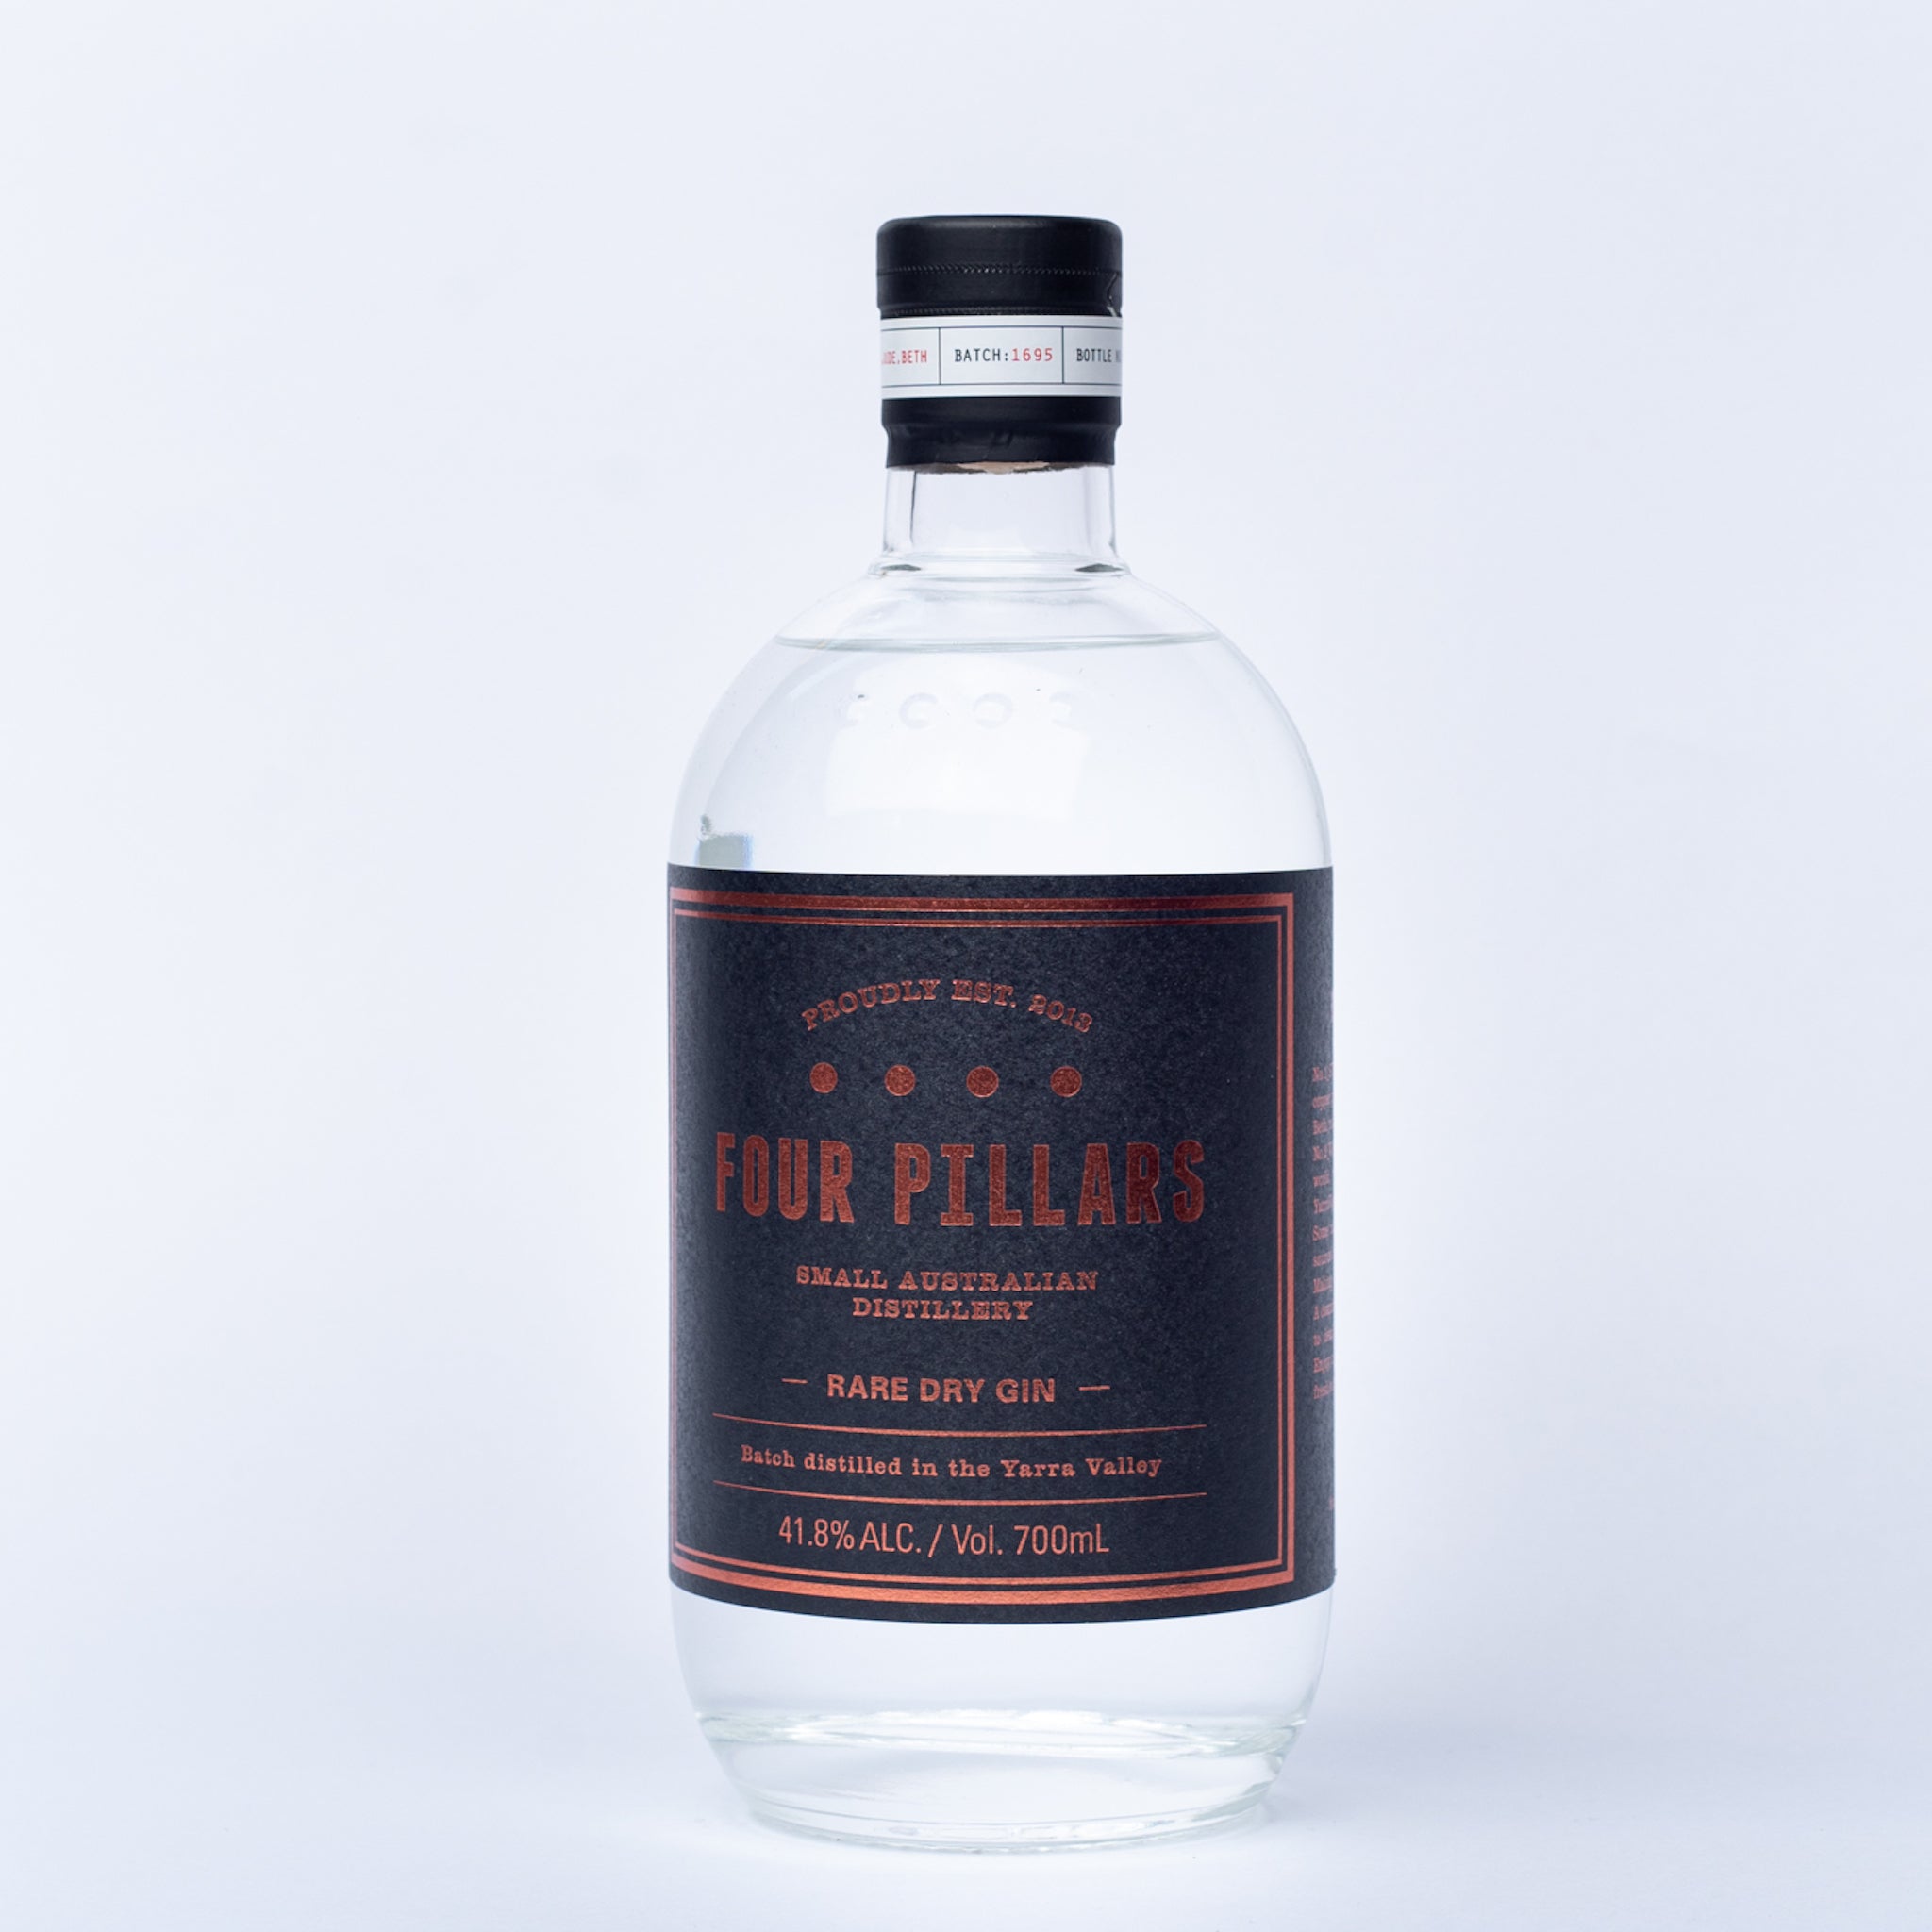 A bottle of Four Pillars Rare Dry Gin.